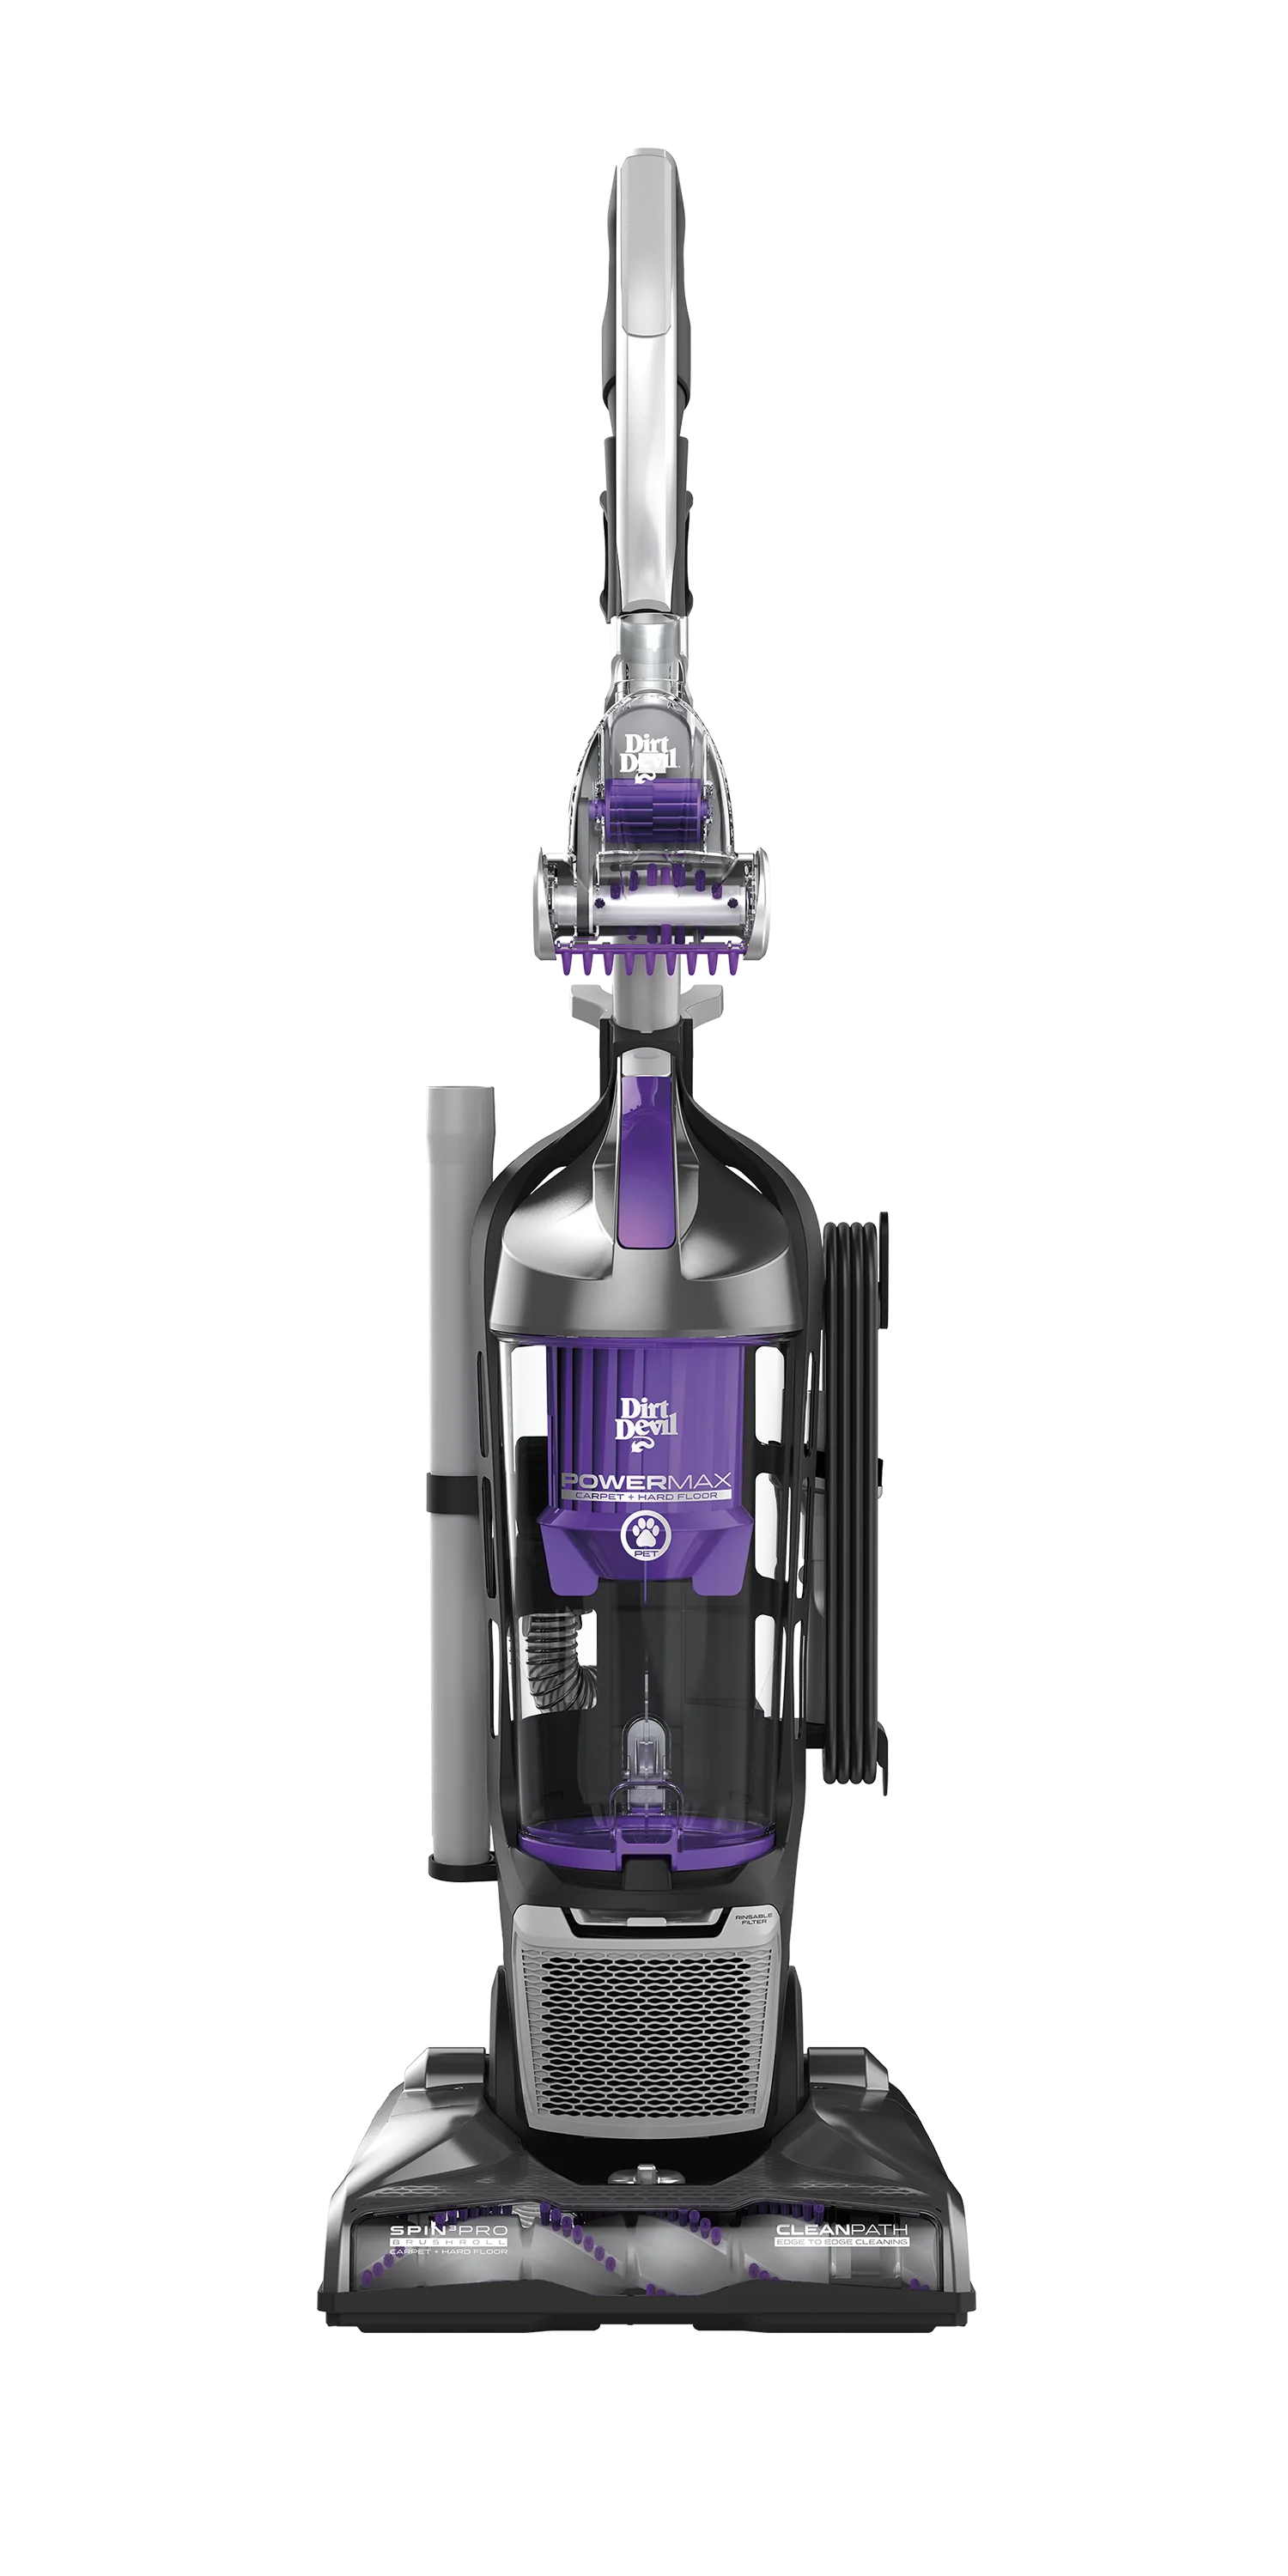 Purple and silver Power Max Pet upright vacuum for pet hair